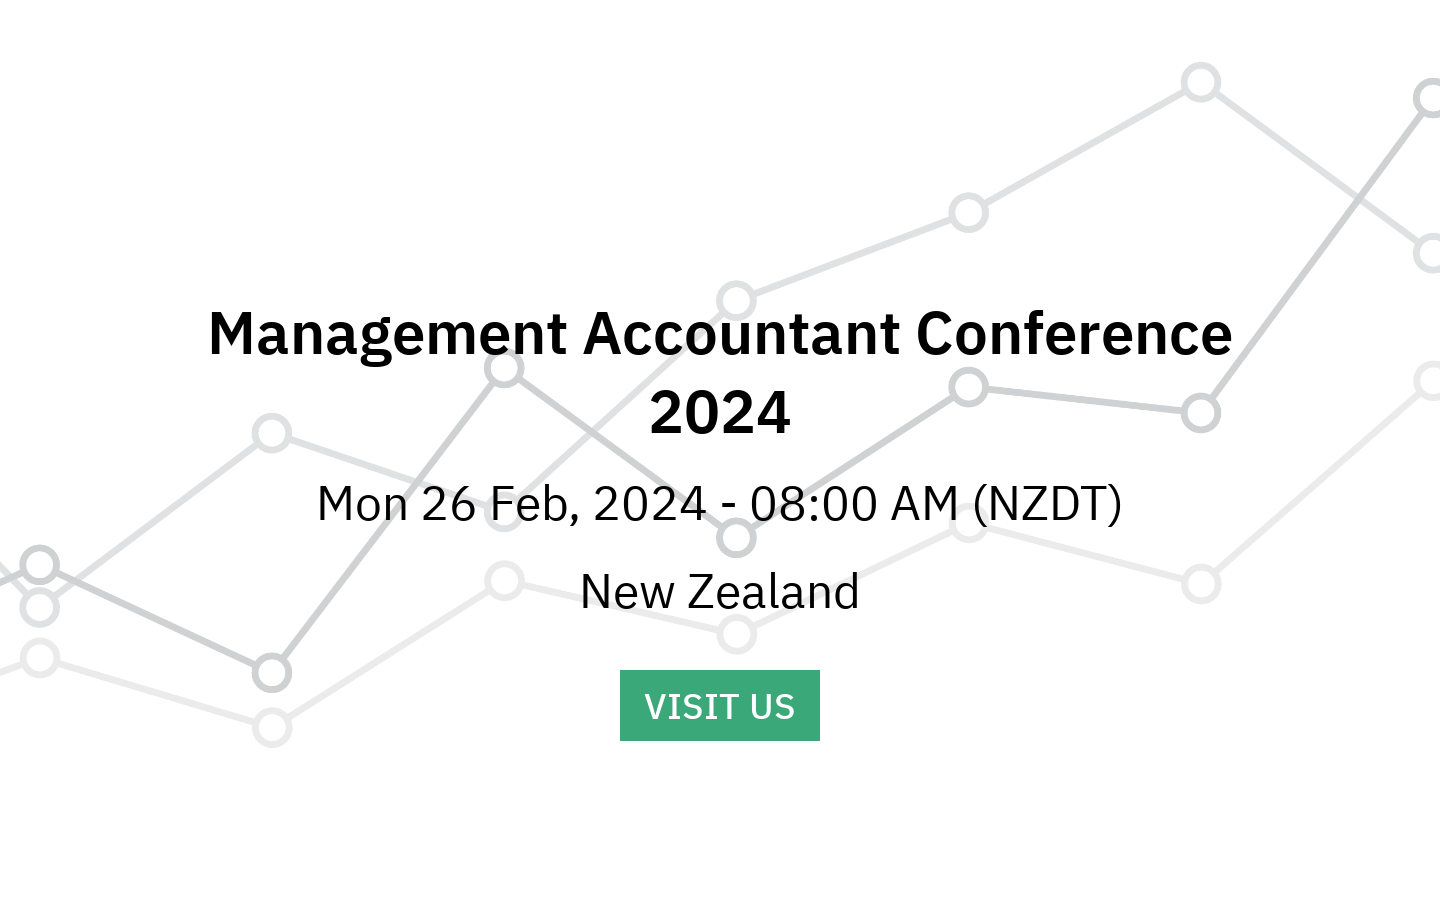 Management Accountant Conference 2024